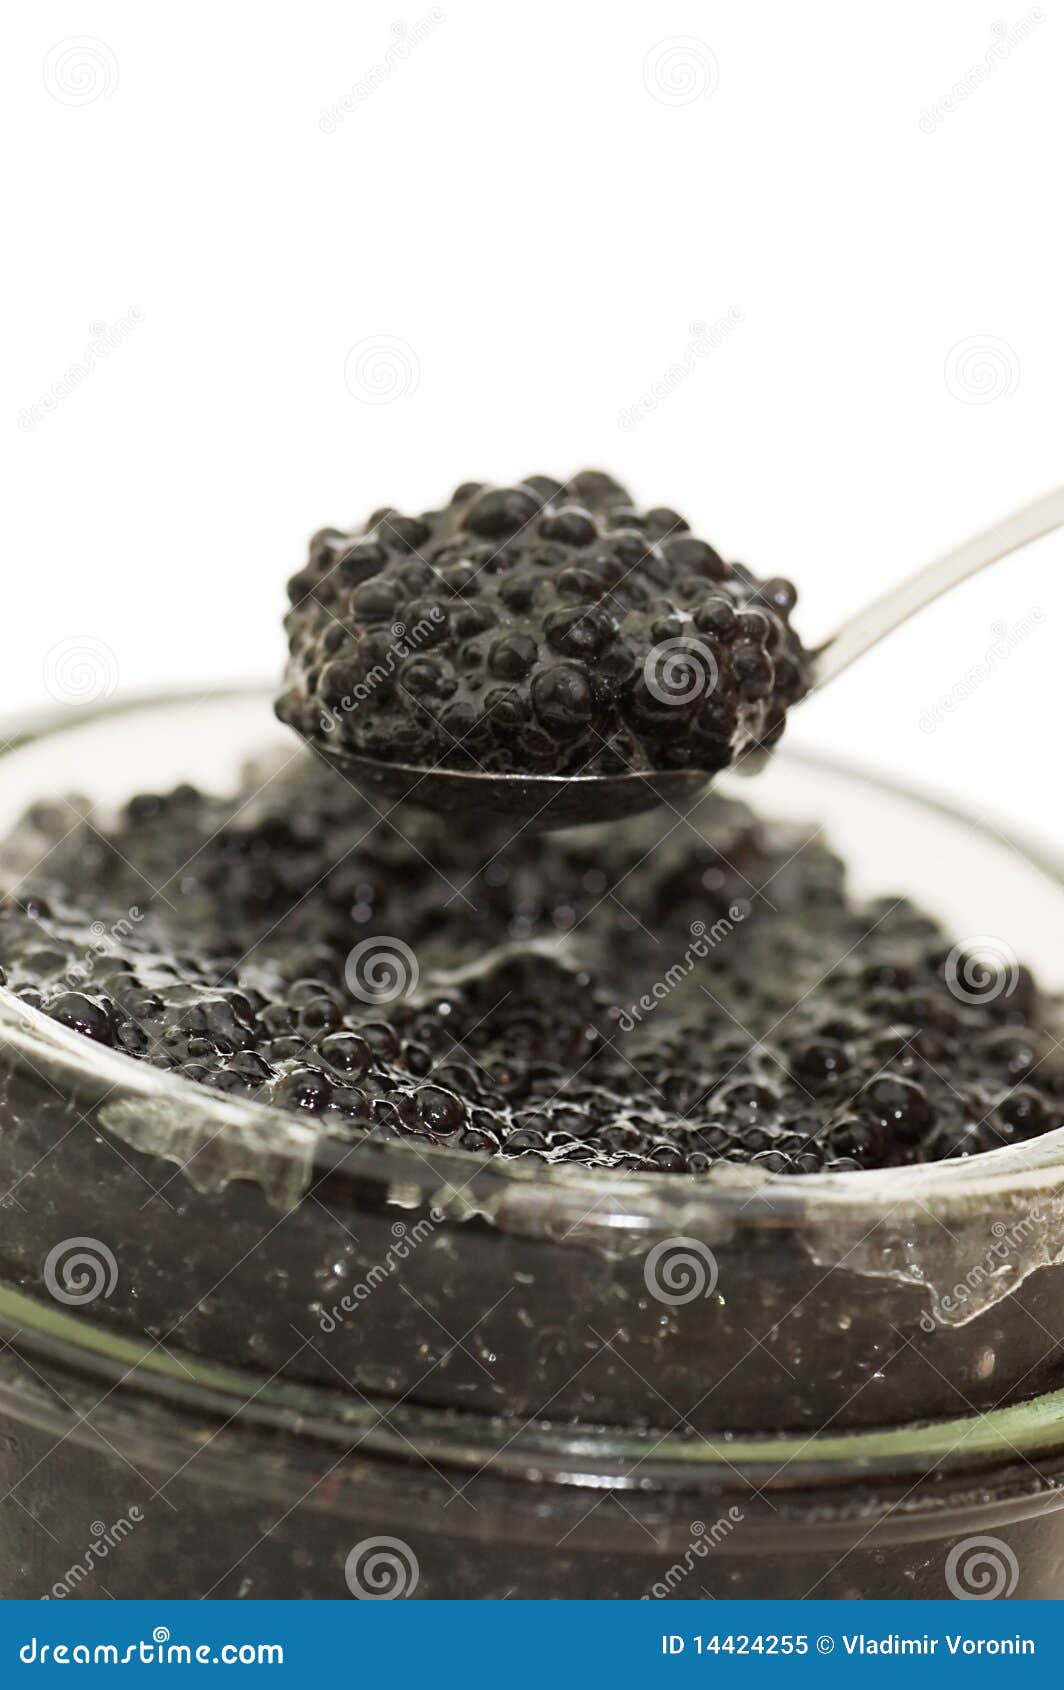 Black Caviar in a Glass Jar Stock Image - Image of isolated, dainty ...